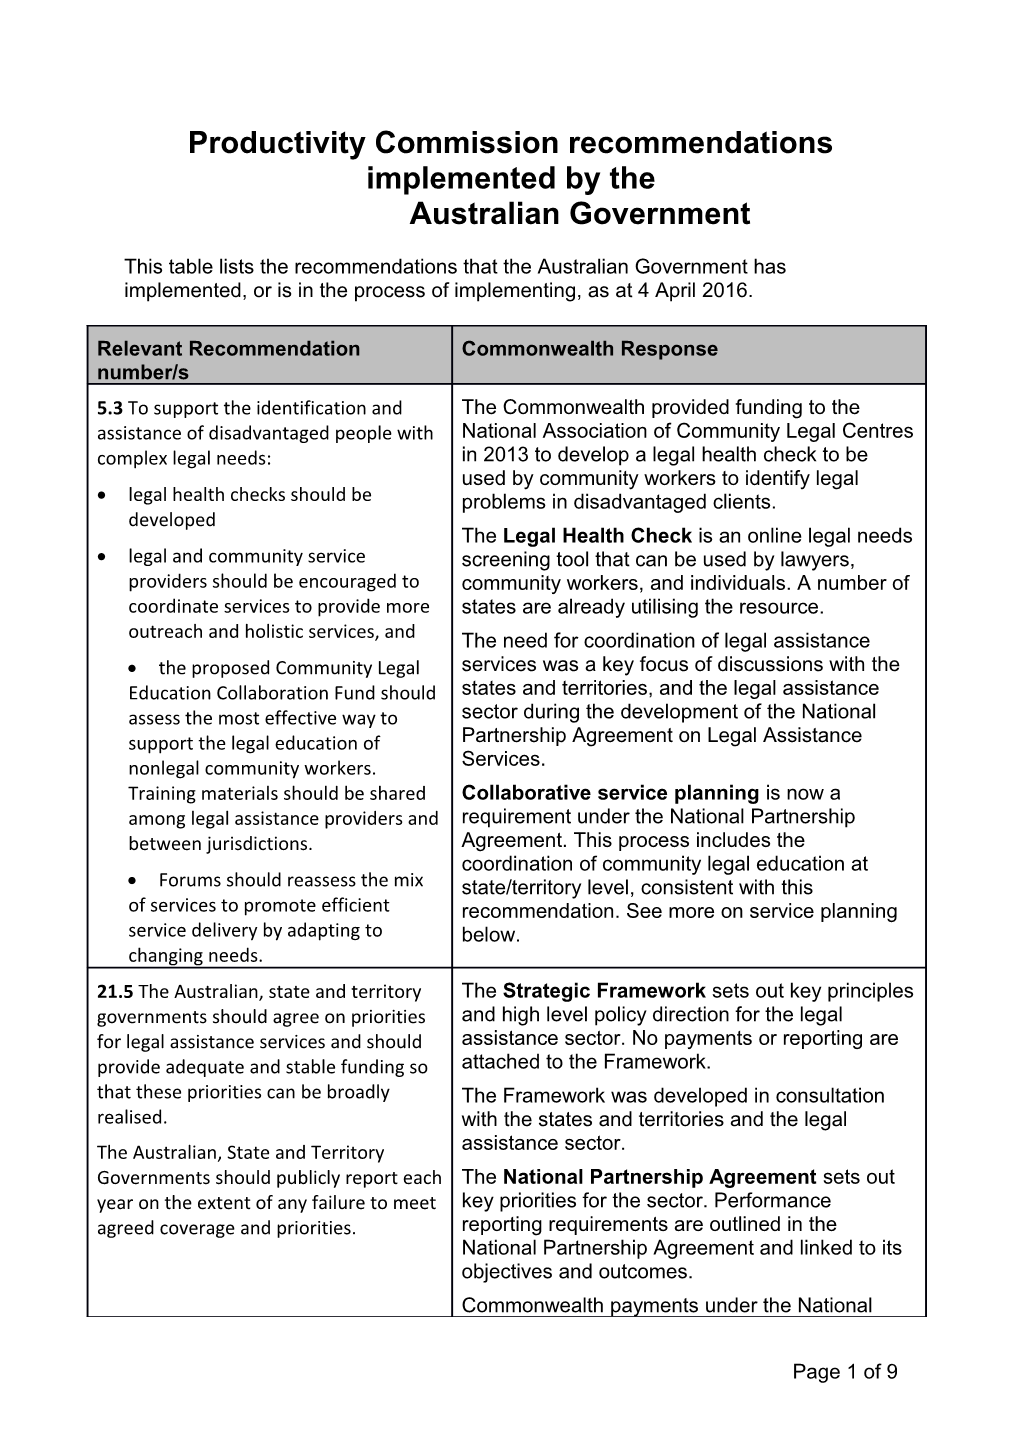 Productivity Commission Recommendations Implemented by the Australian Government